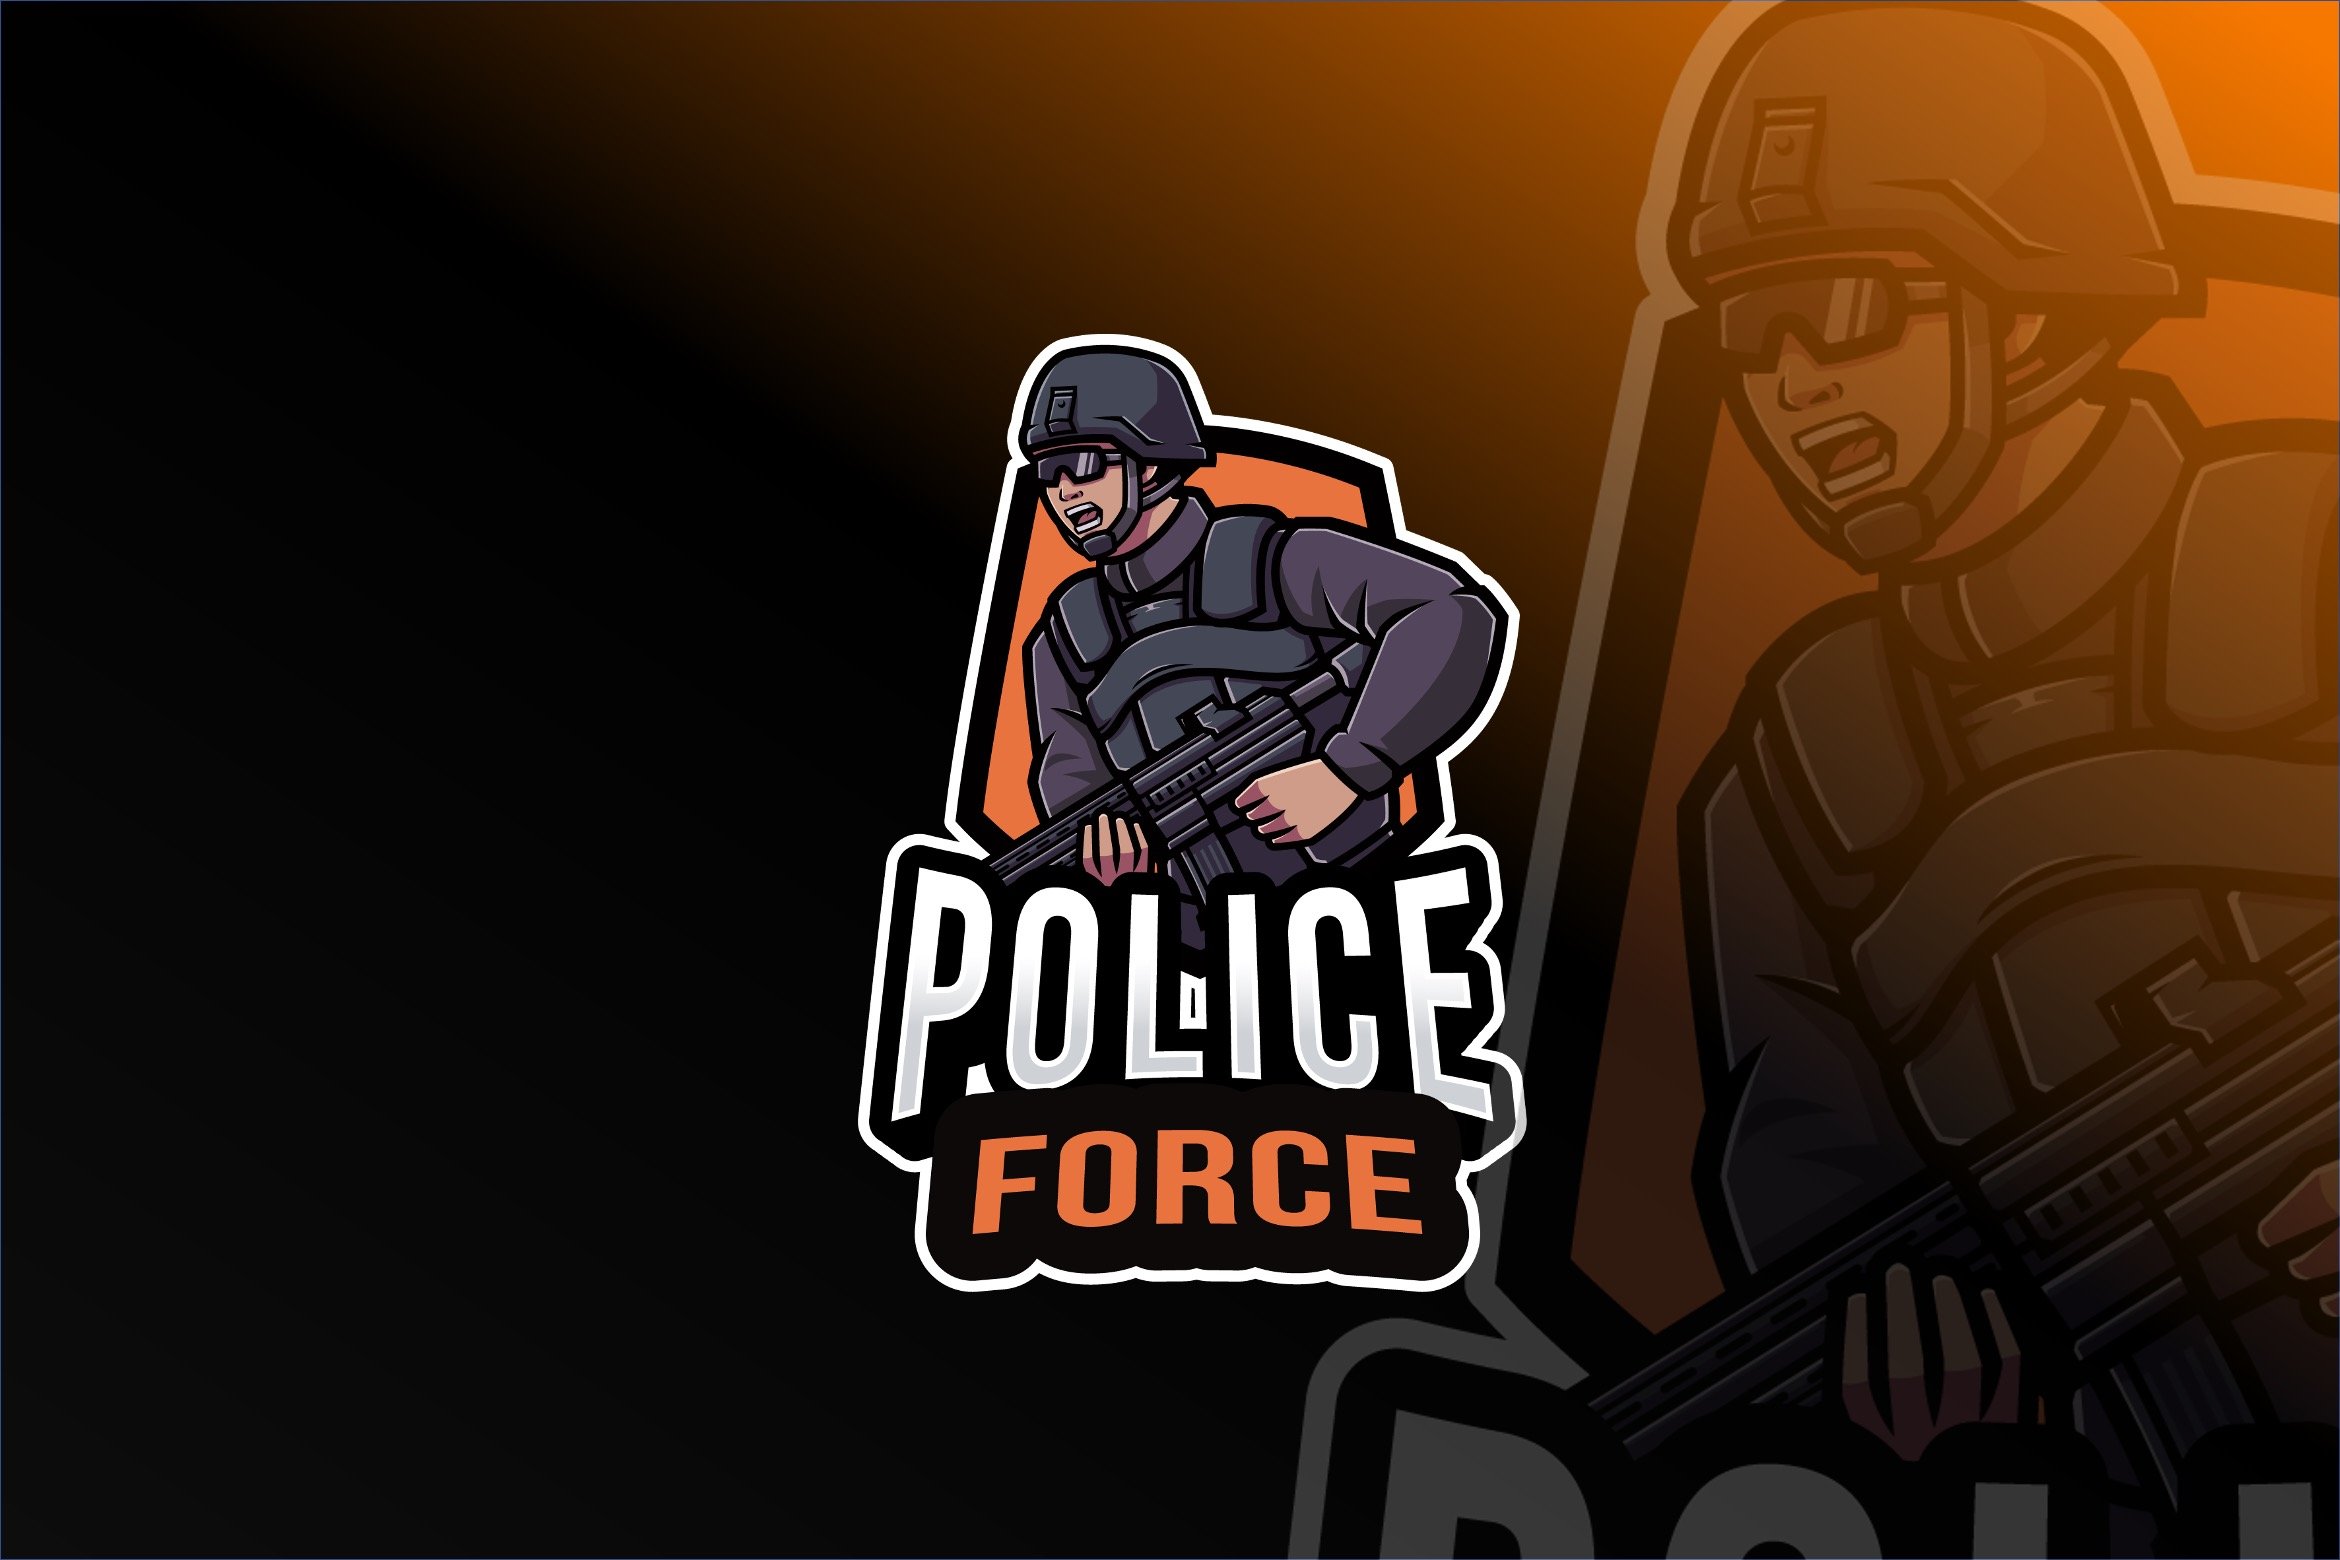 Police Force Logo Template cover image.